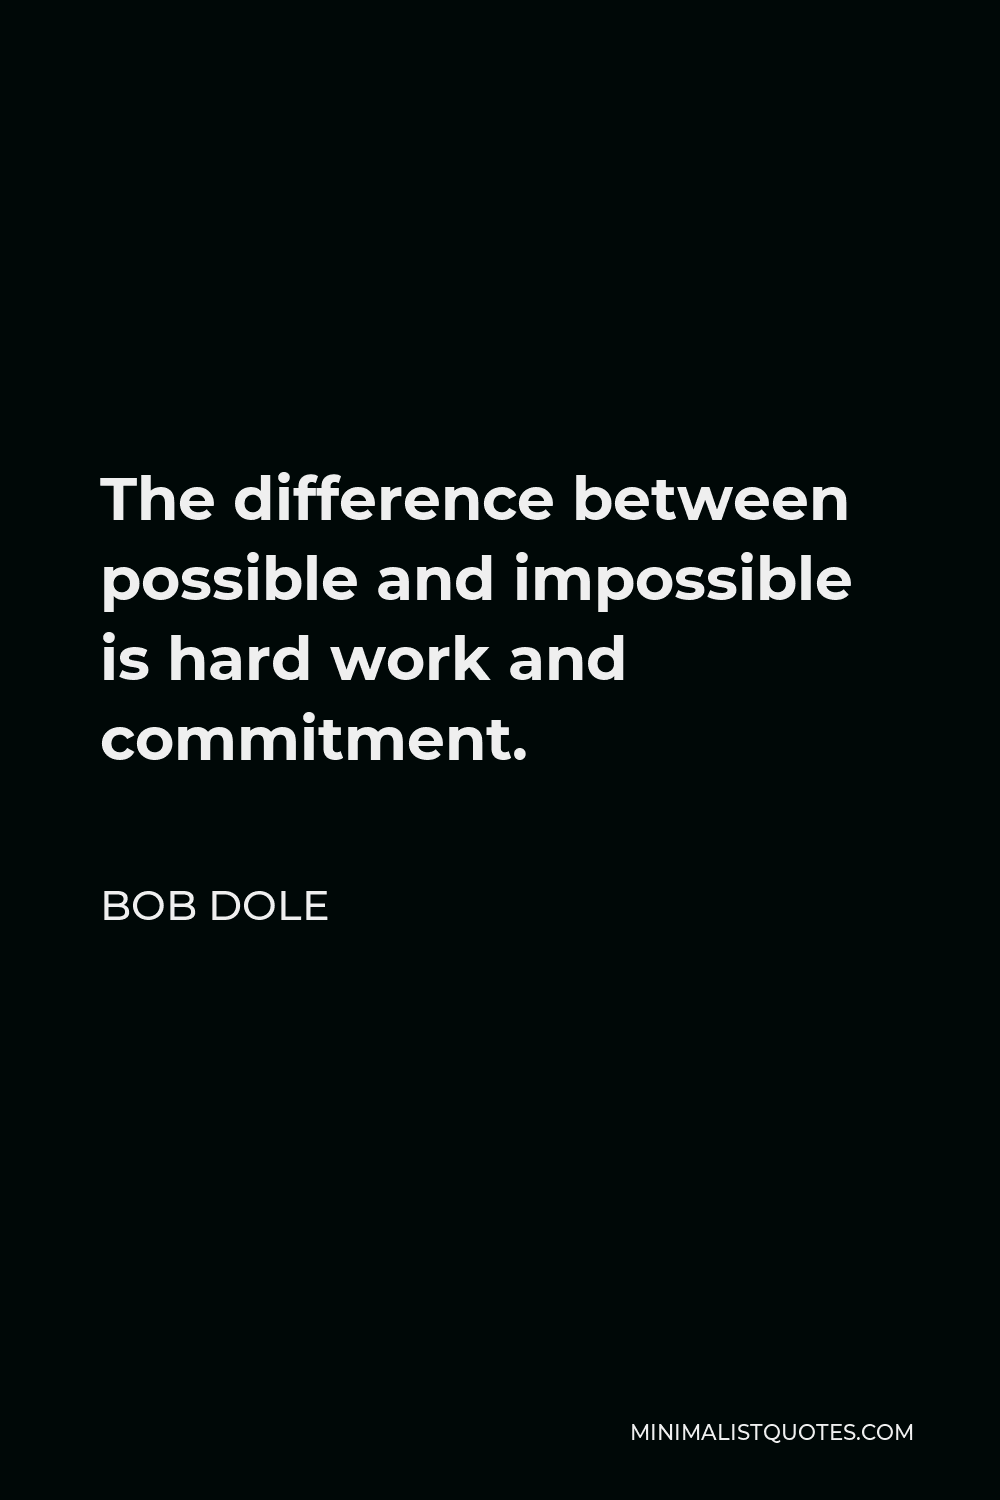 Bob Dole Quote - The difference between possible and impossible is hard work and commitment.